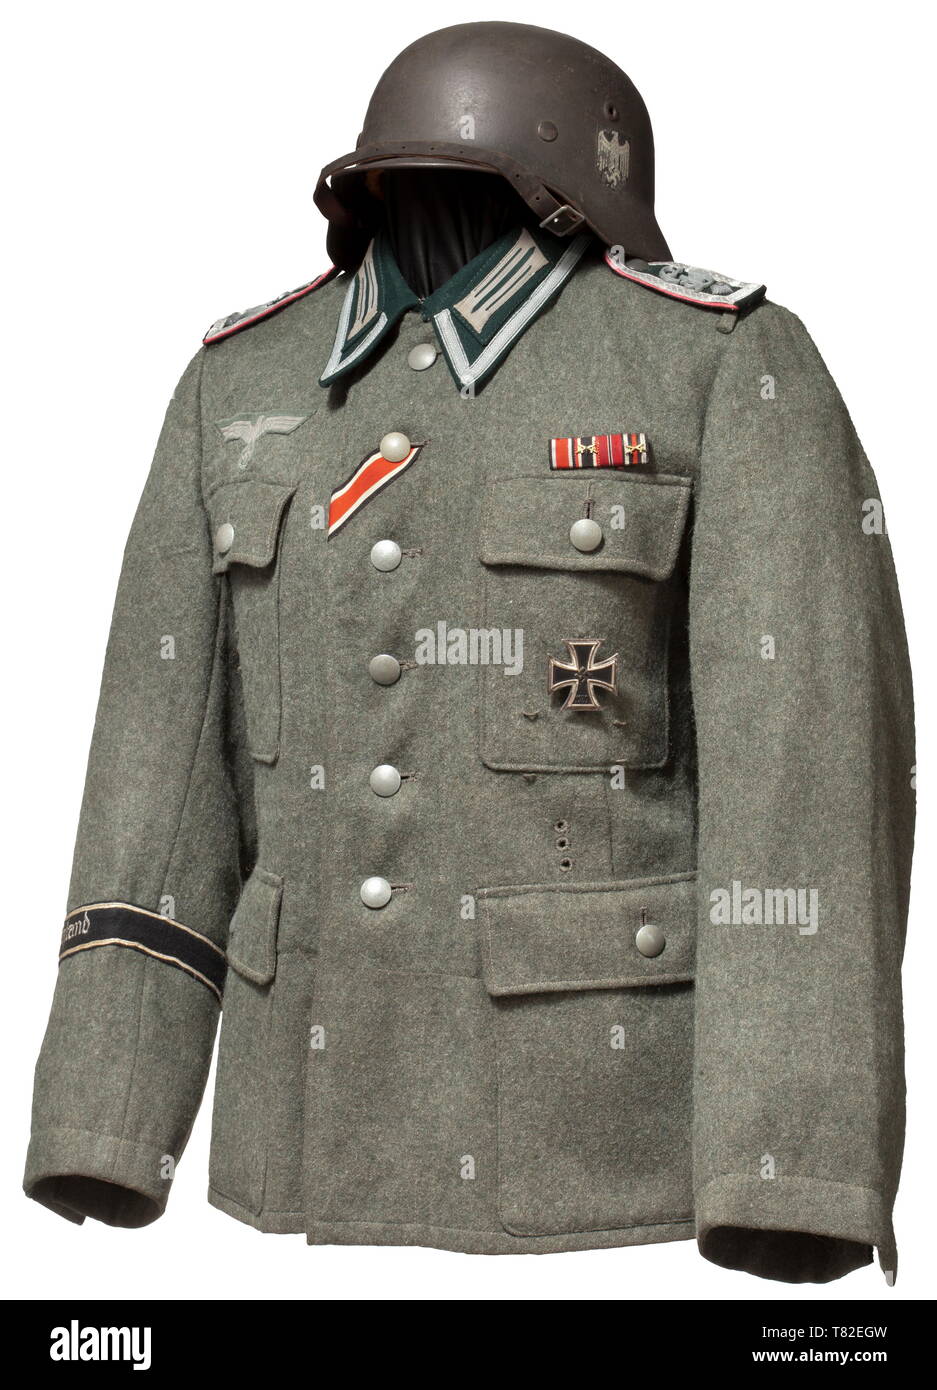 A field tunic M 43 for a Feldwebel in Panzer Regiment "Großdeutschland" Made of field-grey woollen cloth, dark green turn-down collar with stitched-on collar patches and NCO lace, machine-embroidered national eagle, the petrol blue silk inner liner with size- and depot stampings "161 - 165,39 100 59" and "T43". Looped shoulder boards with pink piping, applied rank stars and "GD" cipher in fine zinc (broken). Affixed to the uniform is the original sewn-on sleeveband "Großdeutschland", an Iron Cross 1st Class of 1939 (early issue), a field orders c, Additional-Rights-Clearance-Info-Not-Available Stock Photo